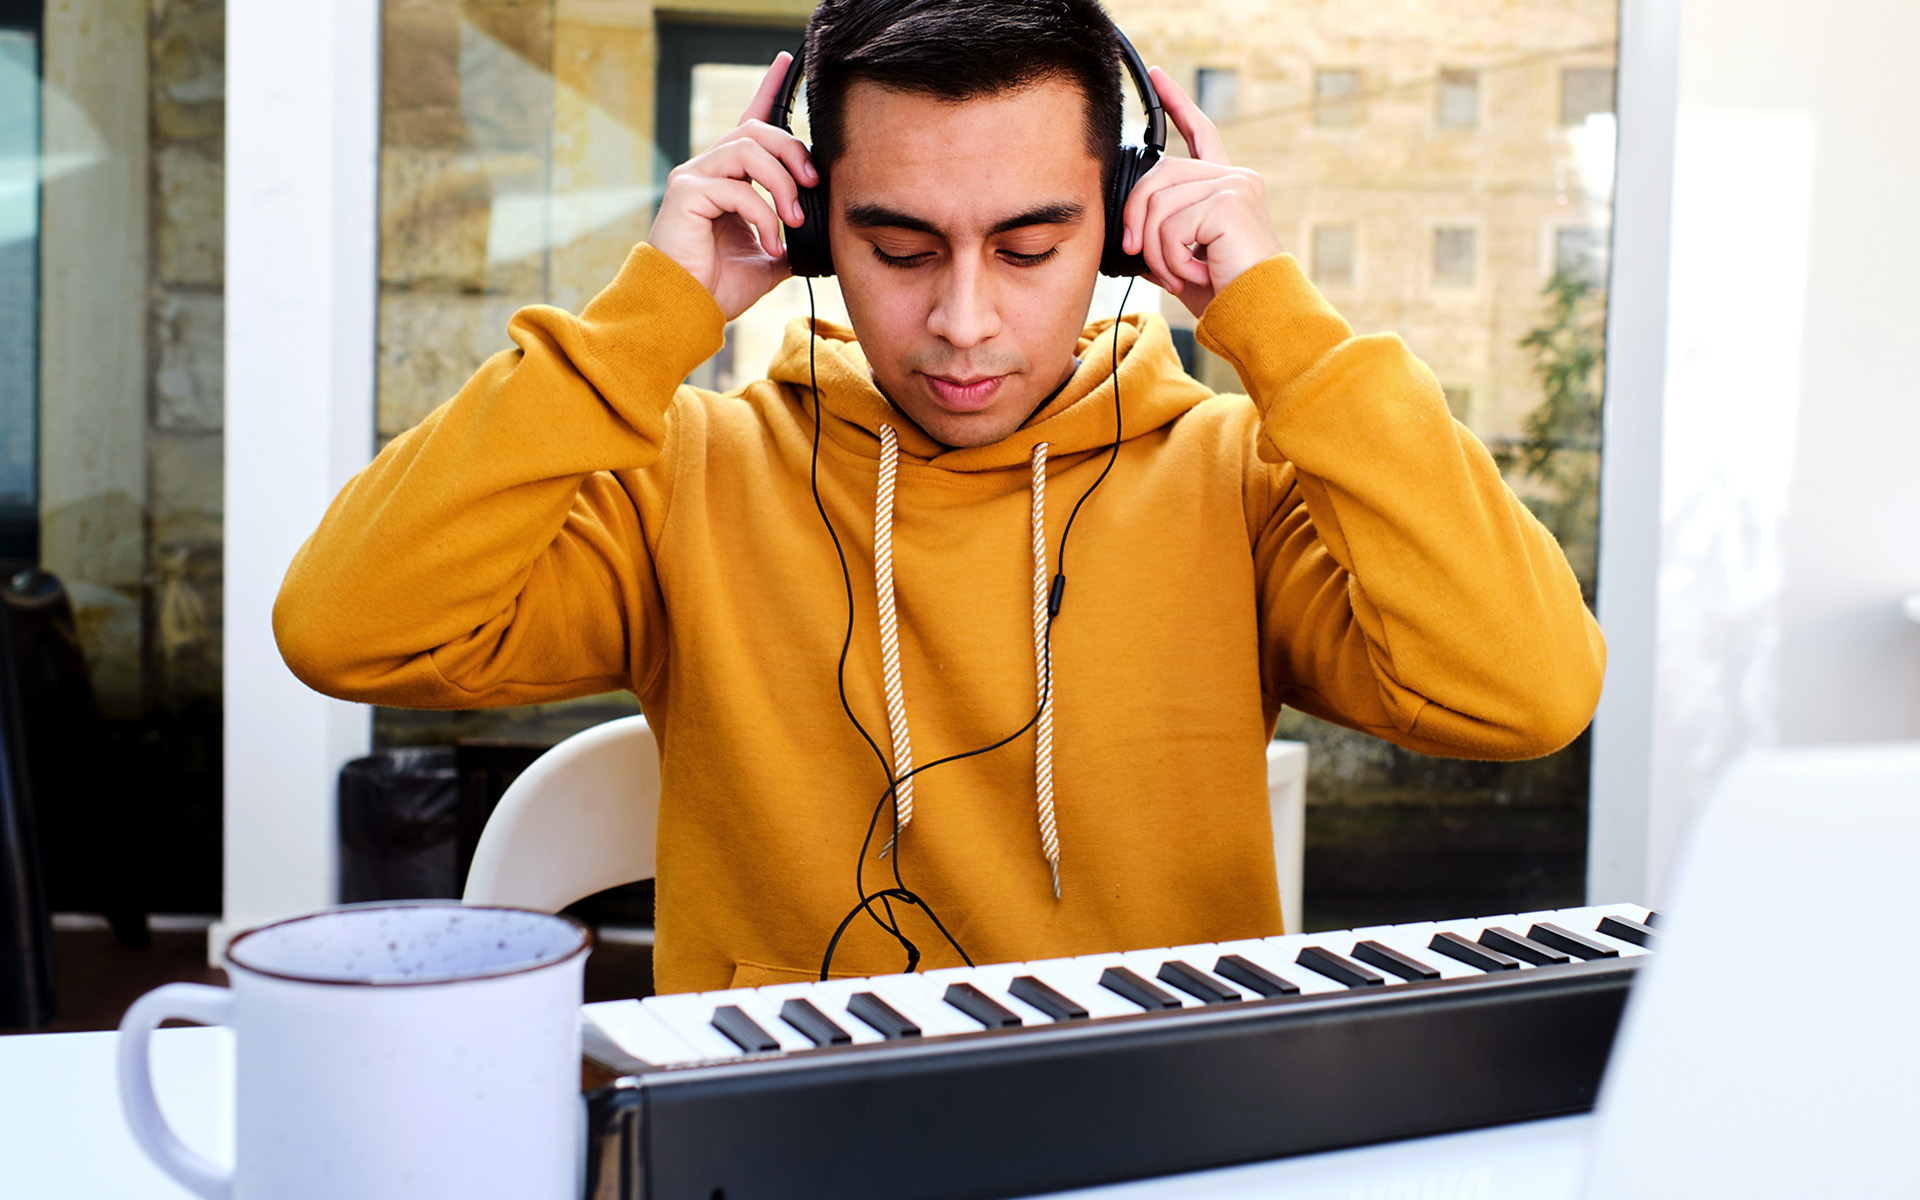 A young music listener puts on his headphones and prepares an intense session of ear training, which we can surmise from his huge cup of coffee.